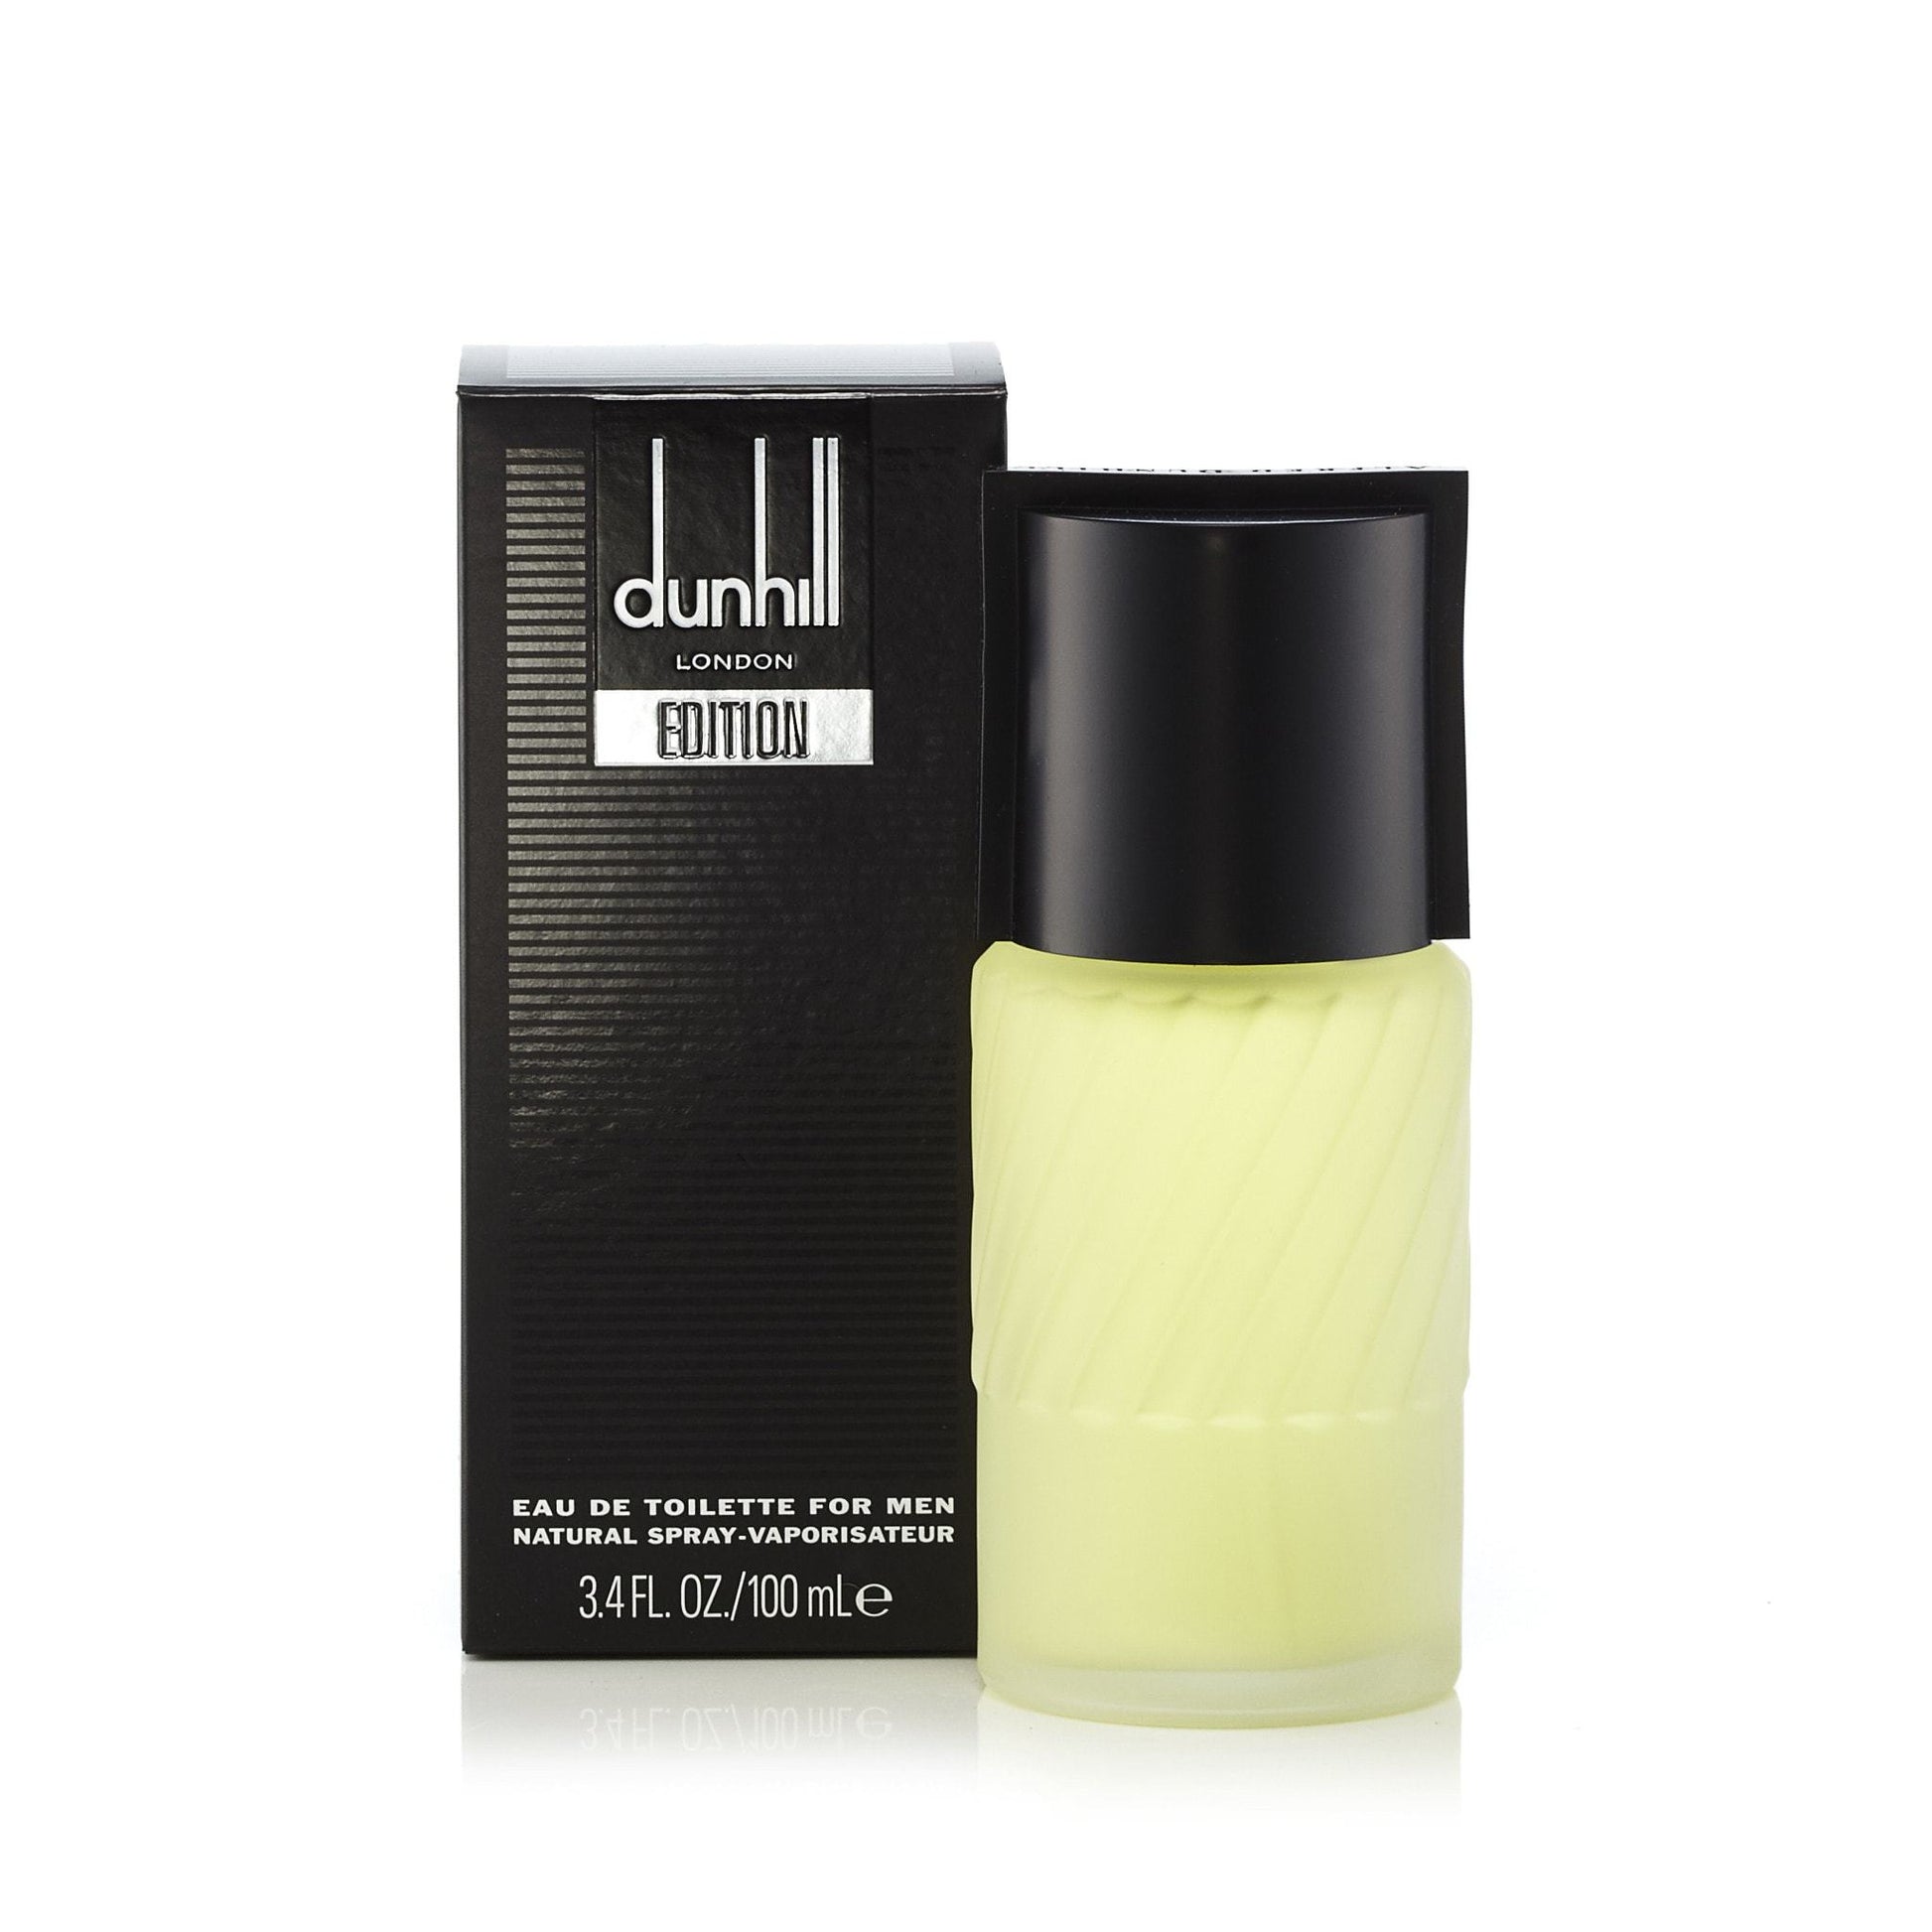 Edition Eau de Toilette Spray for Men by Alfred Dunhill, Product image 2